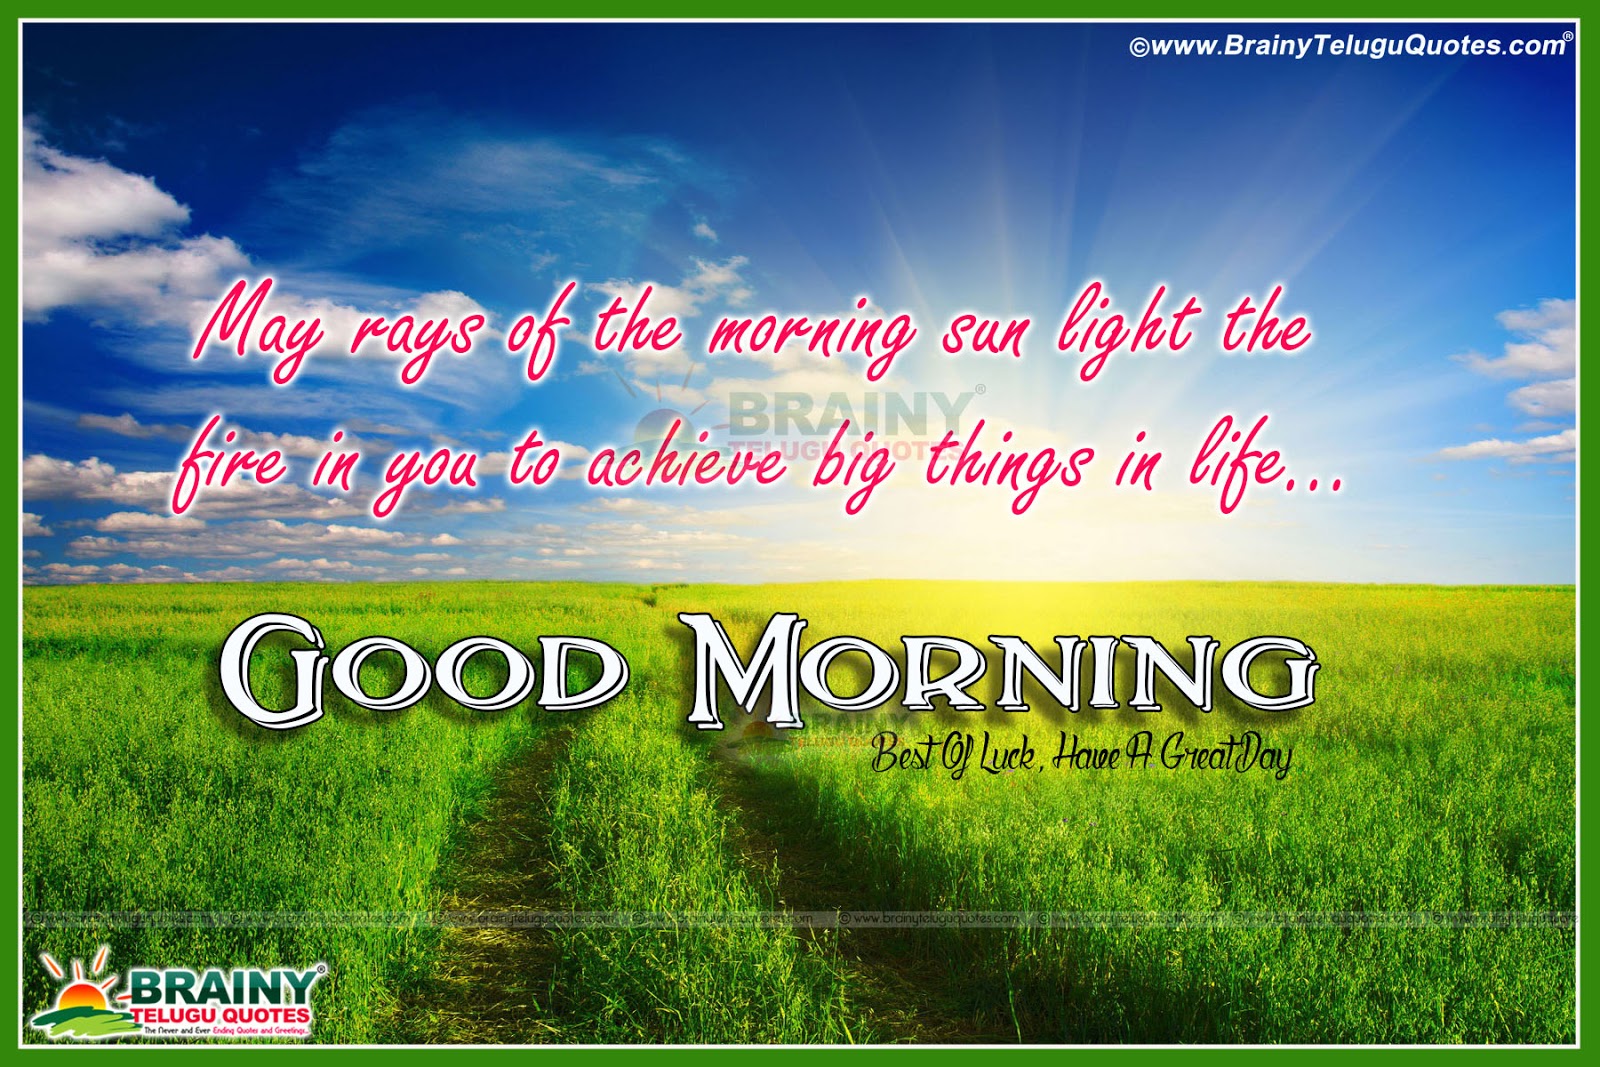 Good Morning English Comments and Best Wishes Images ...